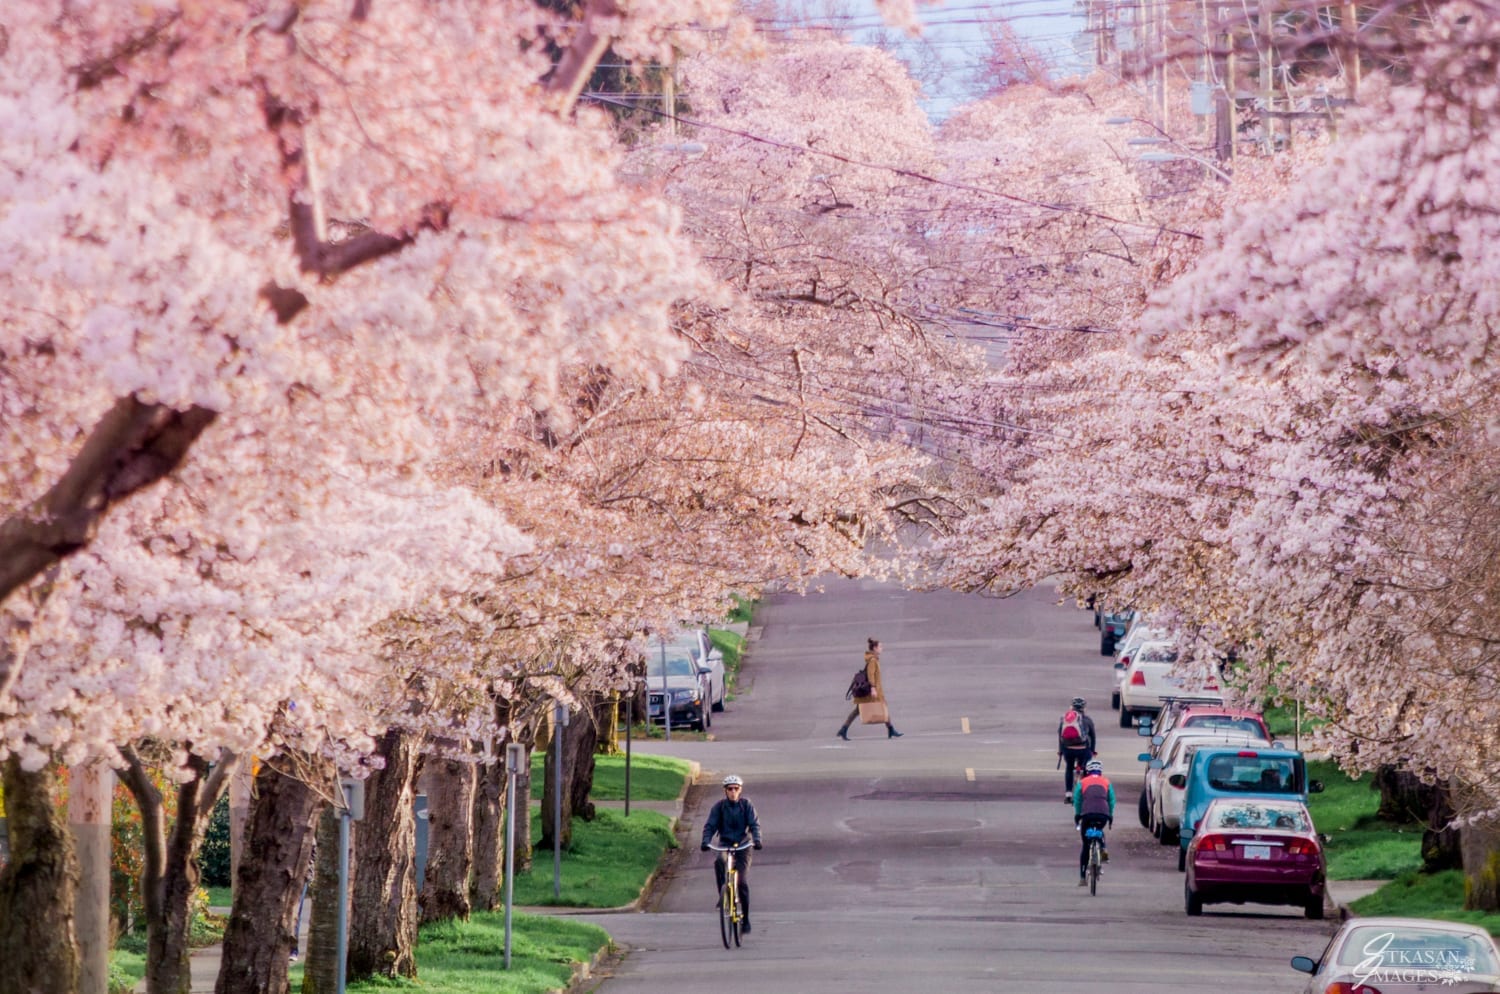 Fairfield's most famous stretch of blossoms, Moss street usually bursts into bloom in March. 